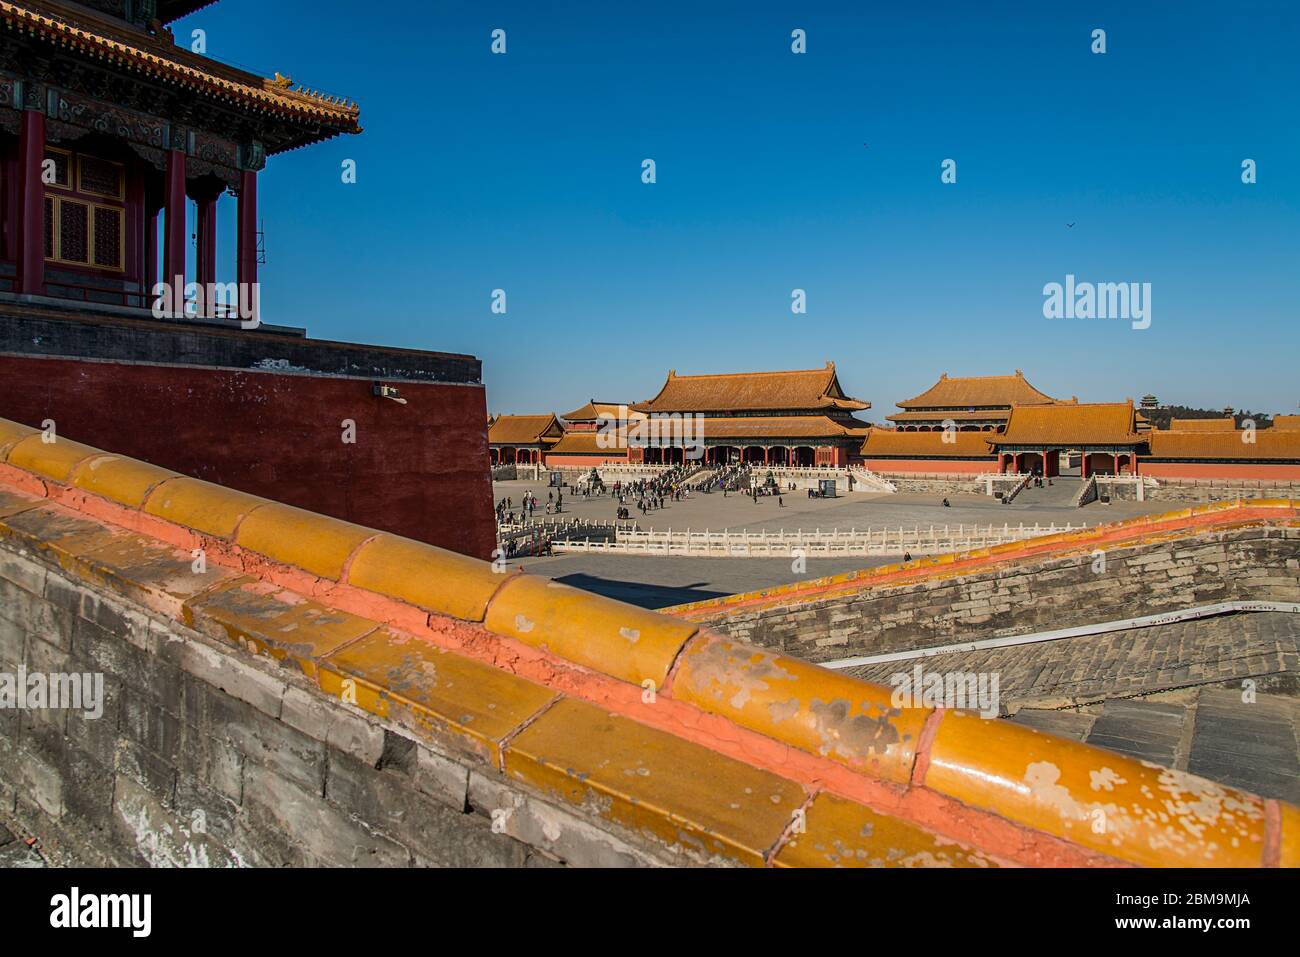 The Imperial Palace, Beijing, China Stock Photo